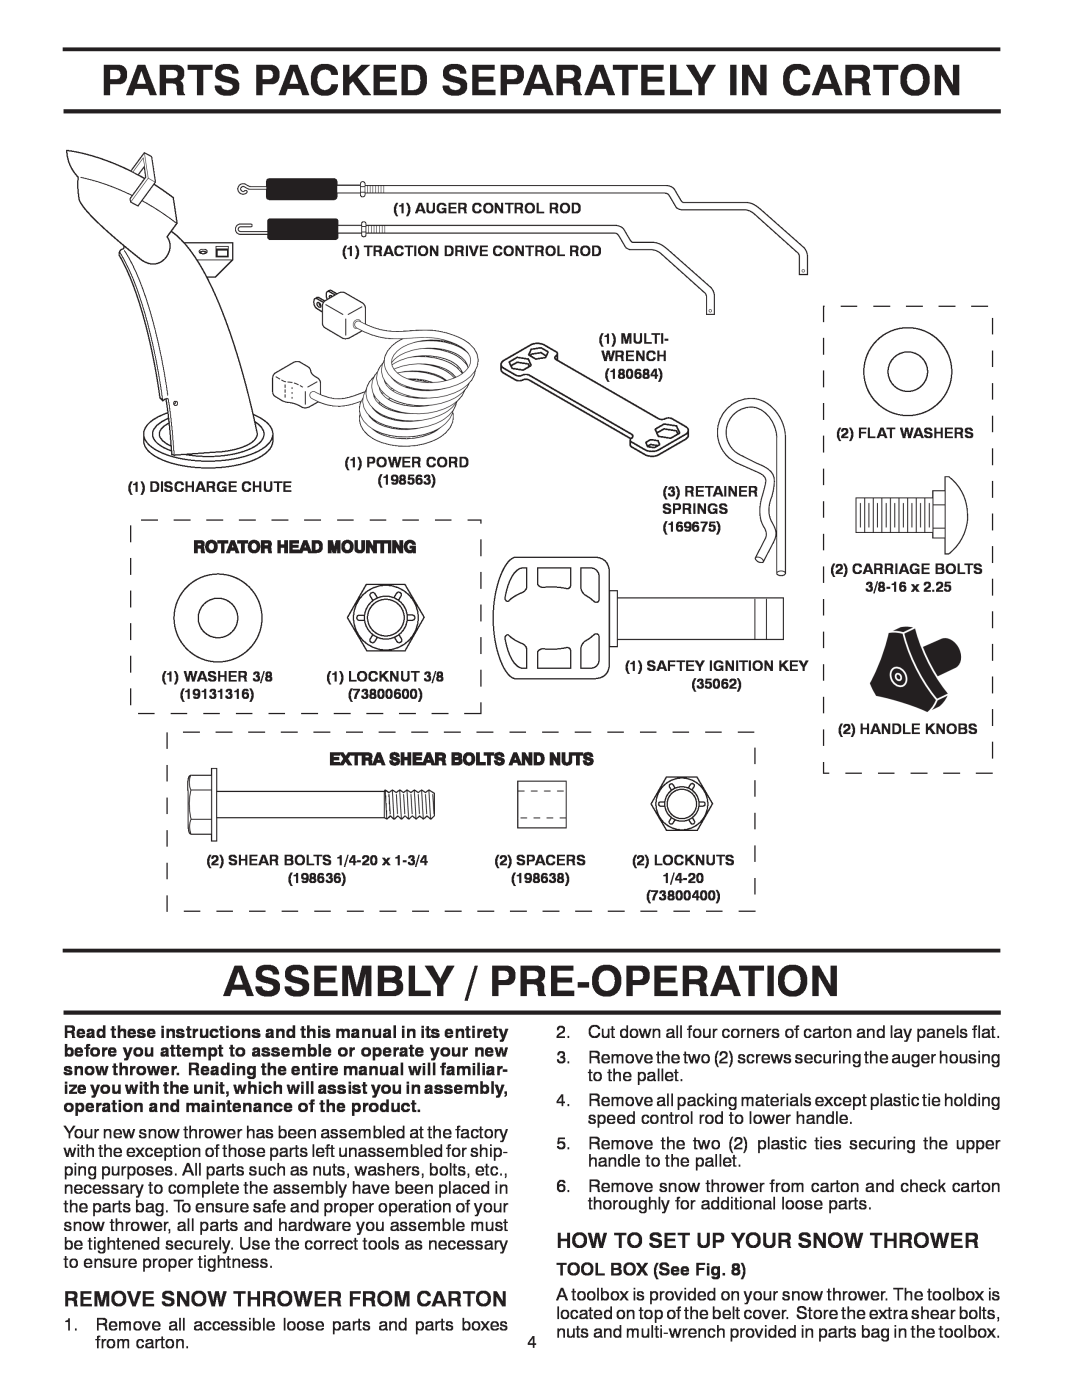 Poulan 421283 owner manual Parts Packed Separately In Carton, Assembly / Pre-Operation, How To Set Up Your Snow Thrower 